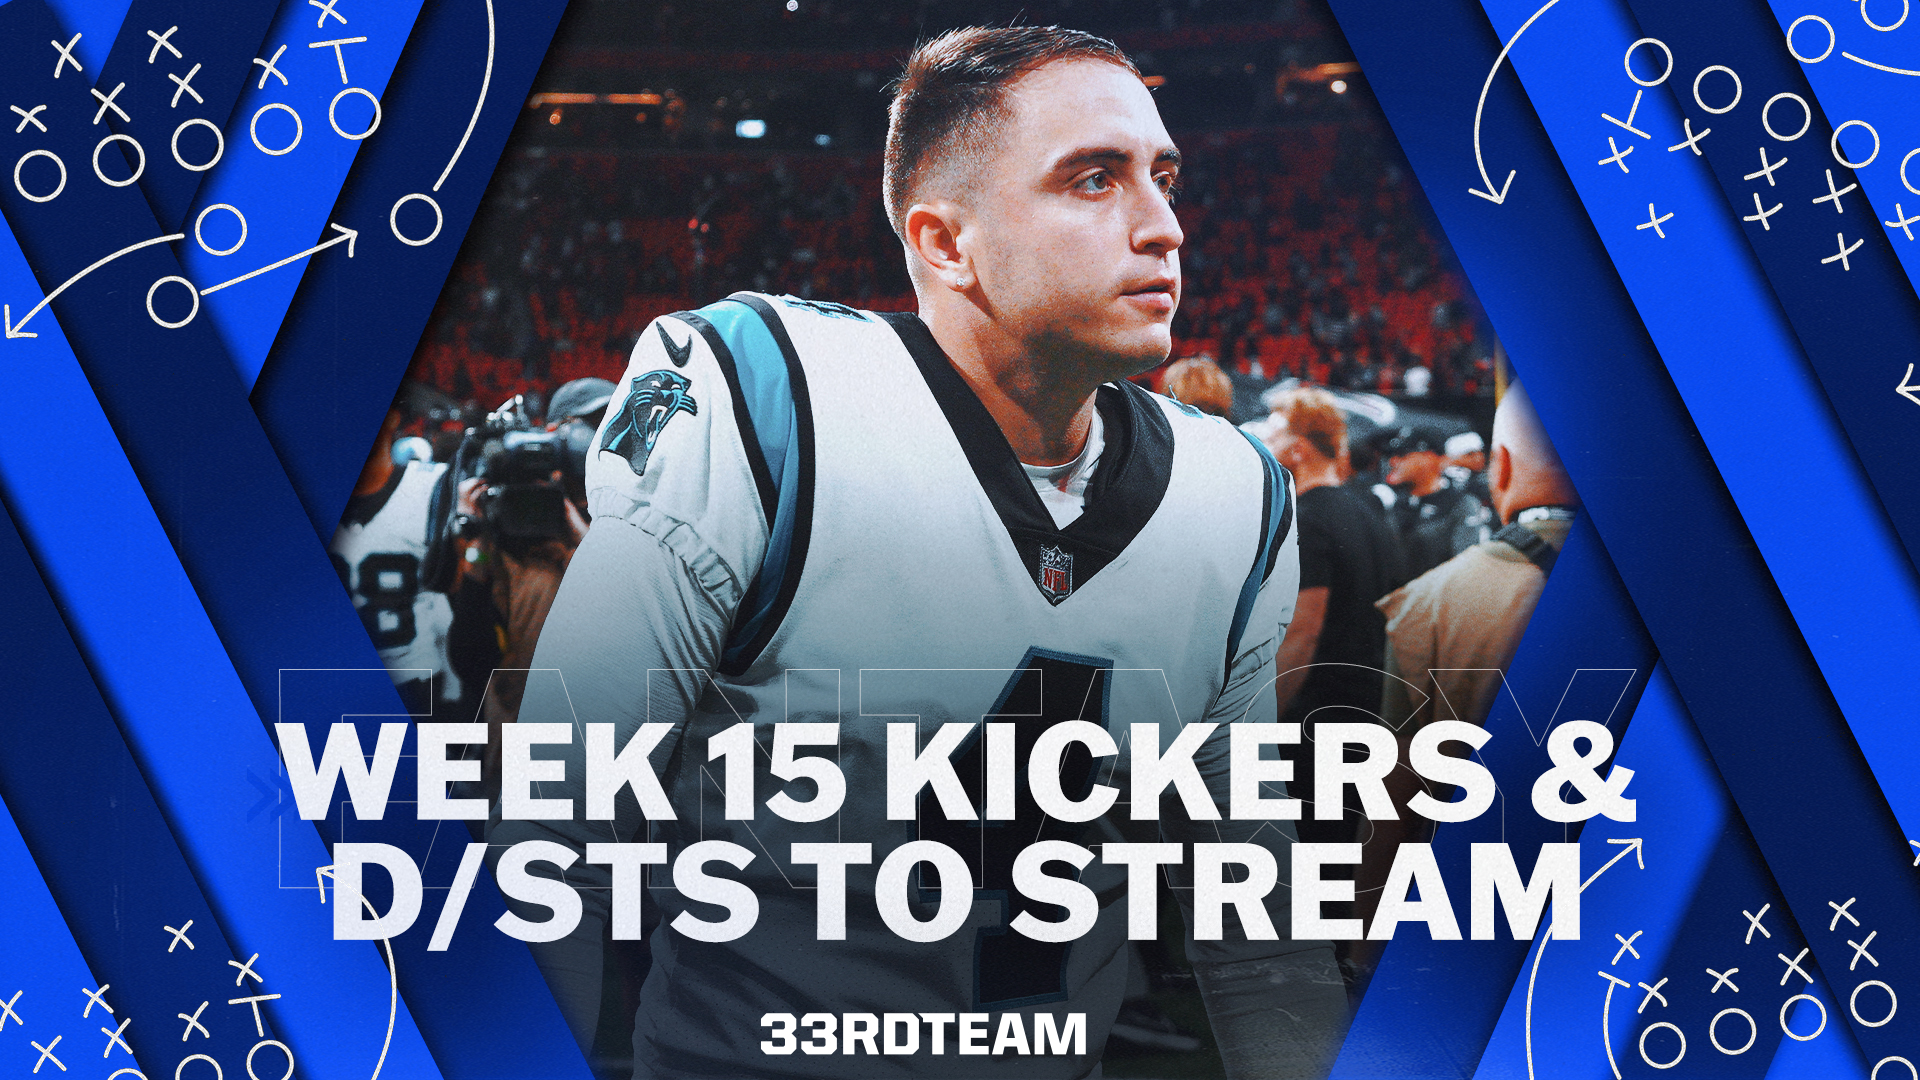 Kickers, D/STs to Stream for NFL Week 15 Fantasy Football